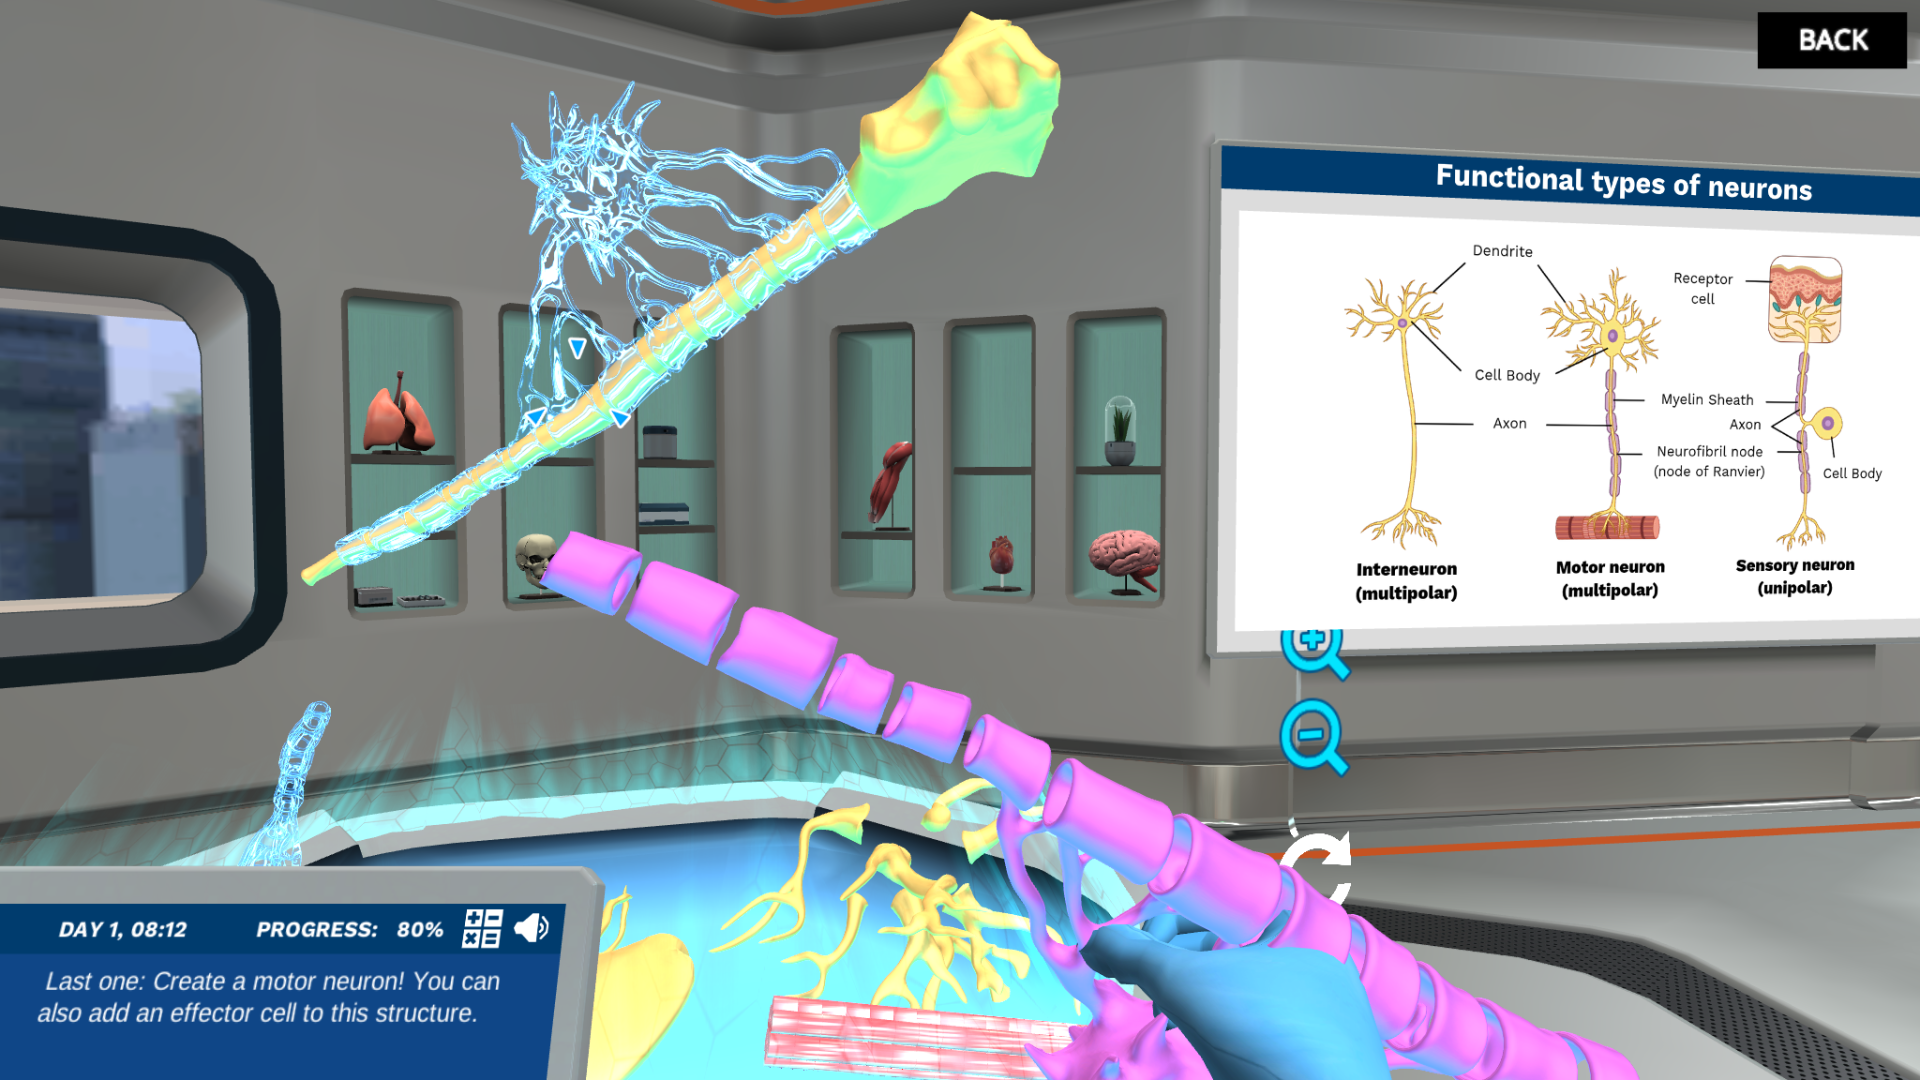 Microanatomy of a Neuron: Build your own neurons!